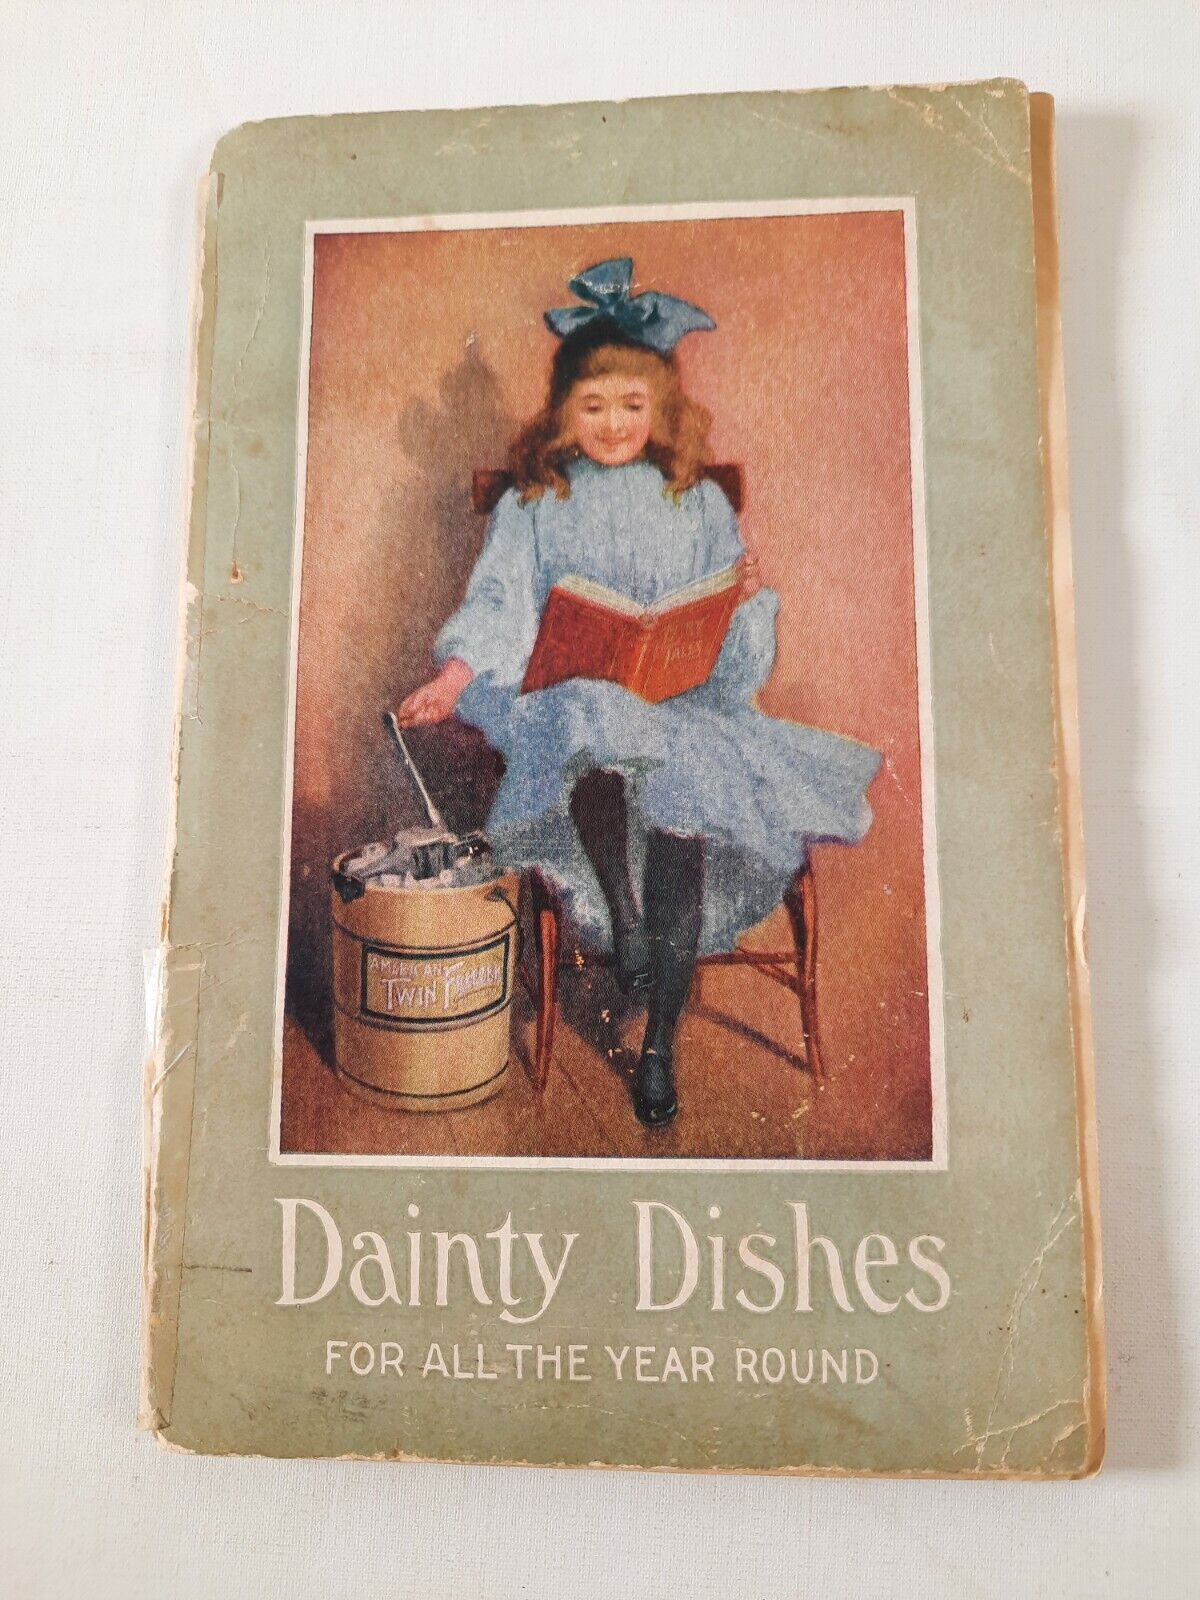 1907 Mrs S T Rorer  Dainty Dishes For All The Year Round Recipes for Ice Creams